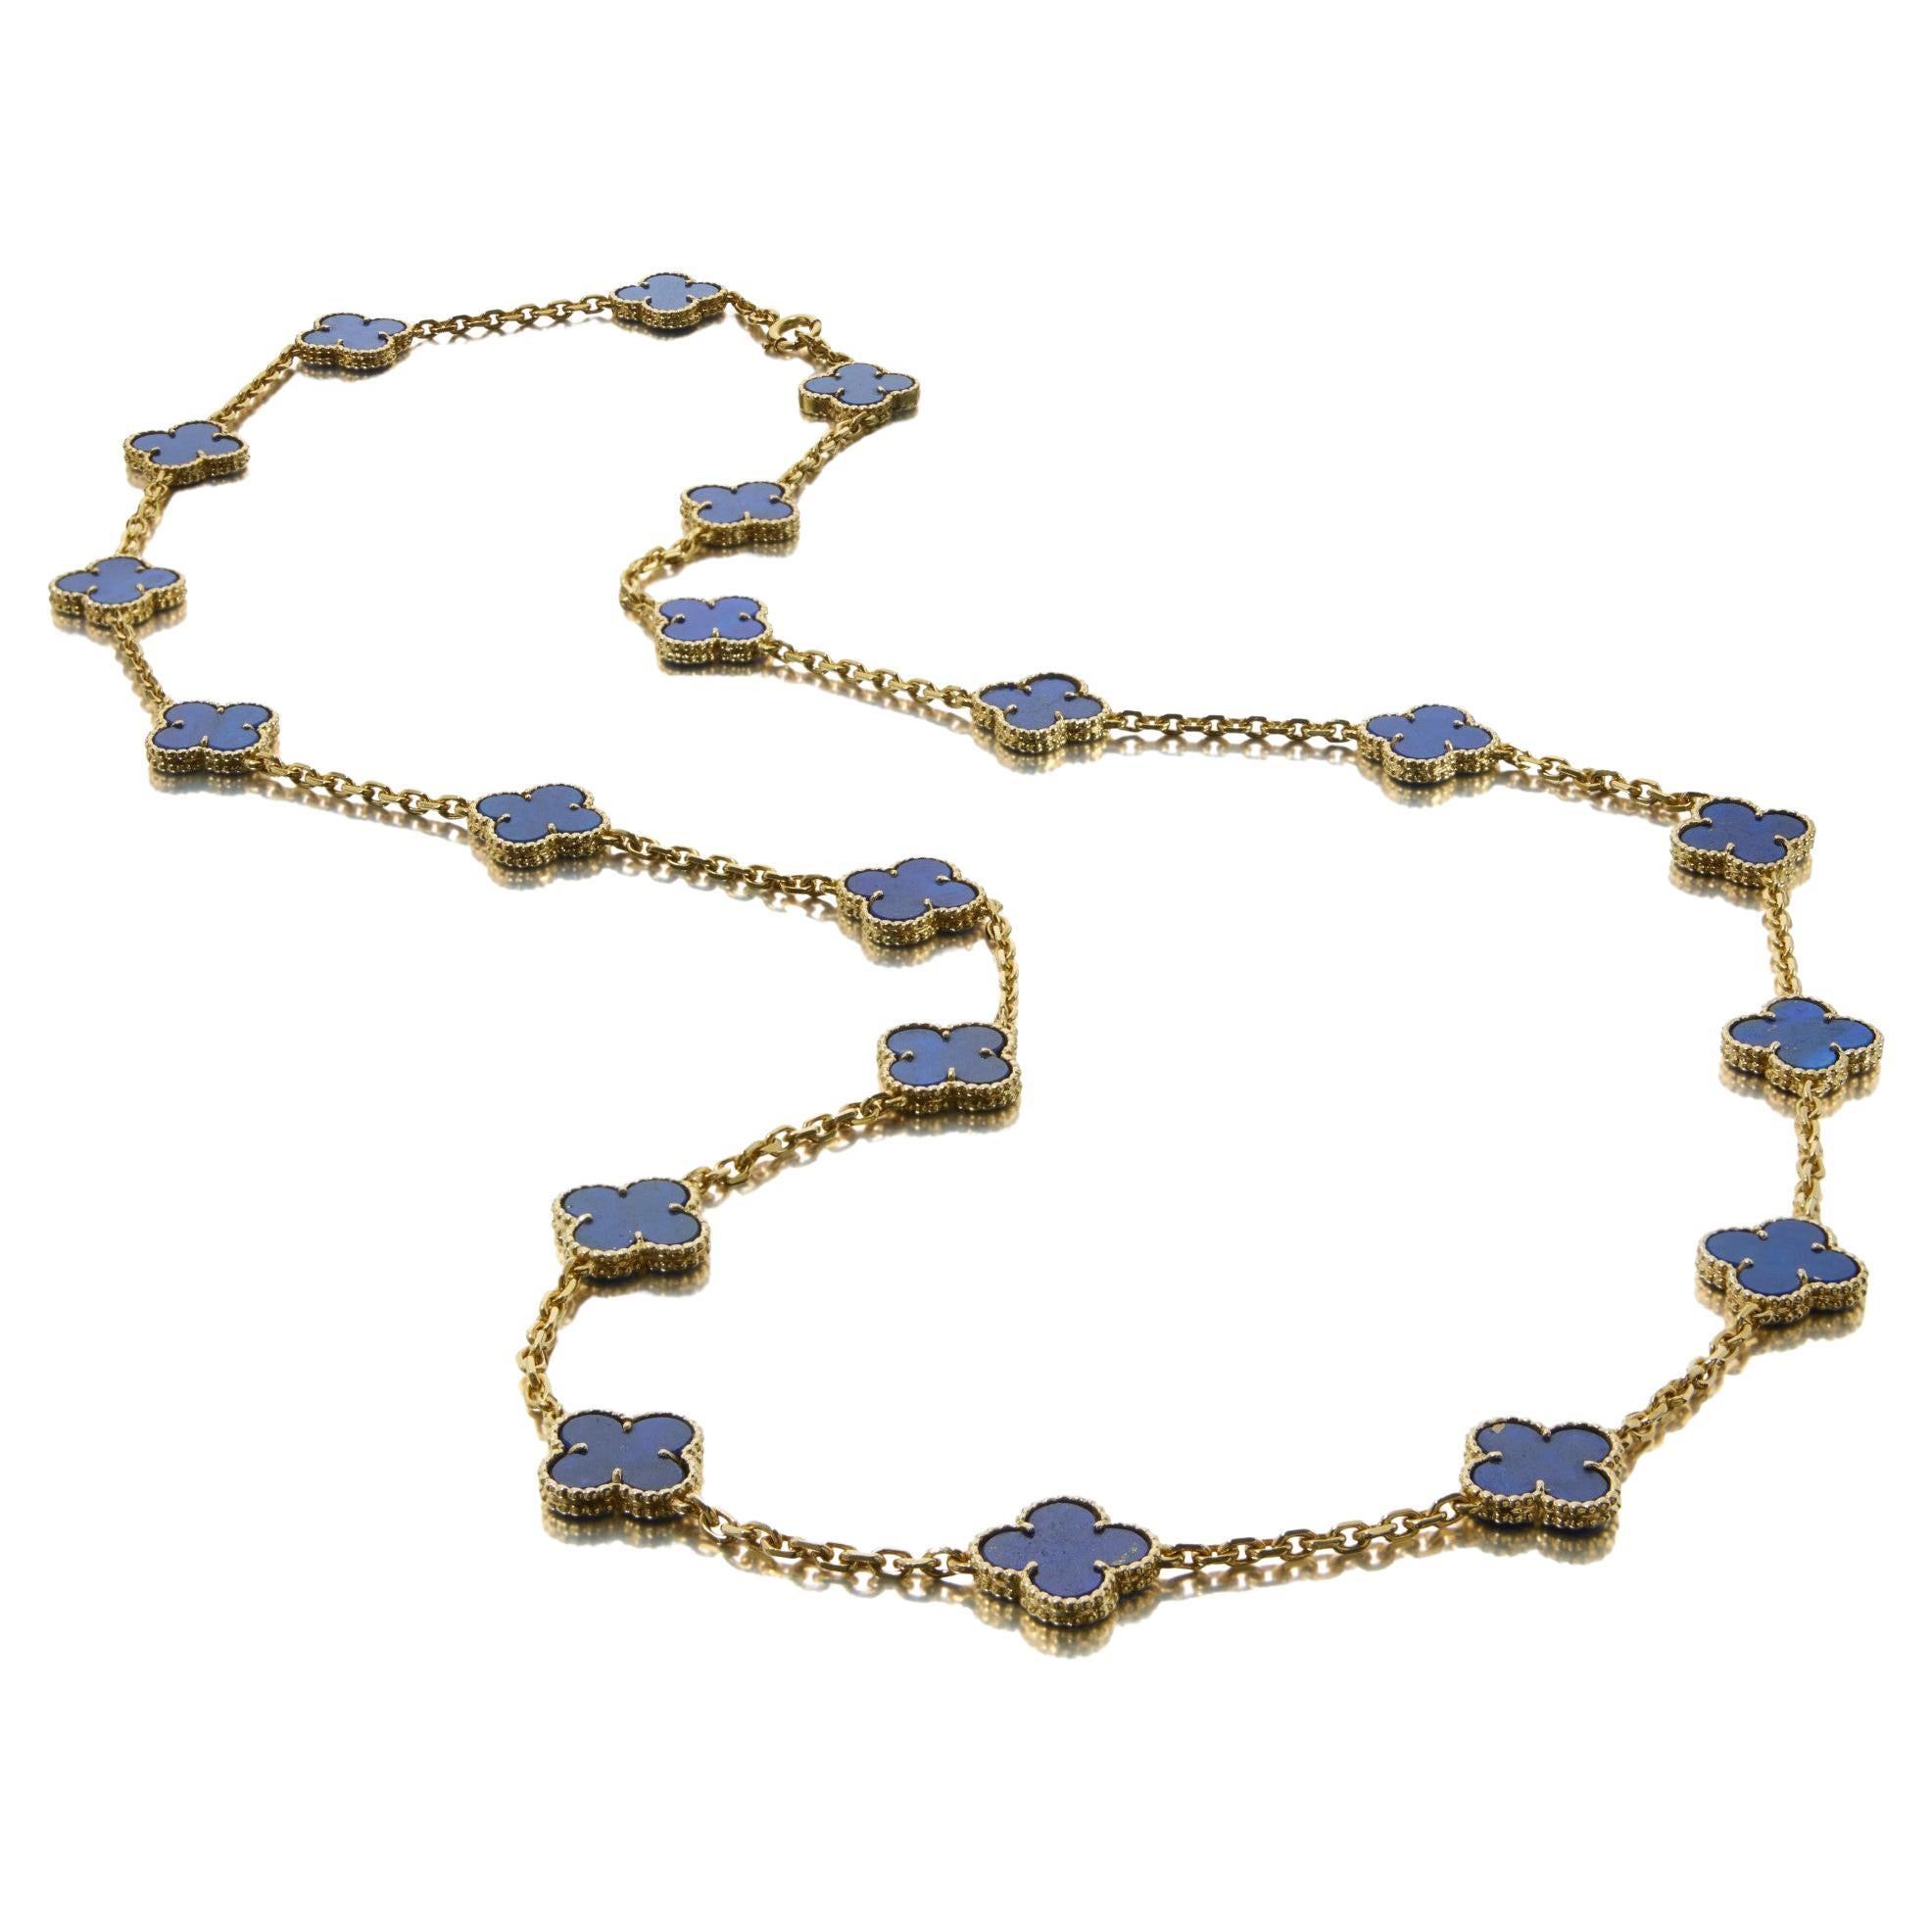 Van Cleef & Arpels Gold and Lapis Lazuli 'Vintage Alhambra' Necklace in 18k
yellow gold. This necklace is composed of 20 quatrefoil lapis lazuli motifs on a 18k yellow gold chain. Each motif measures appprox. 15mm. Equipped with a spring closing.